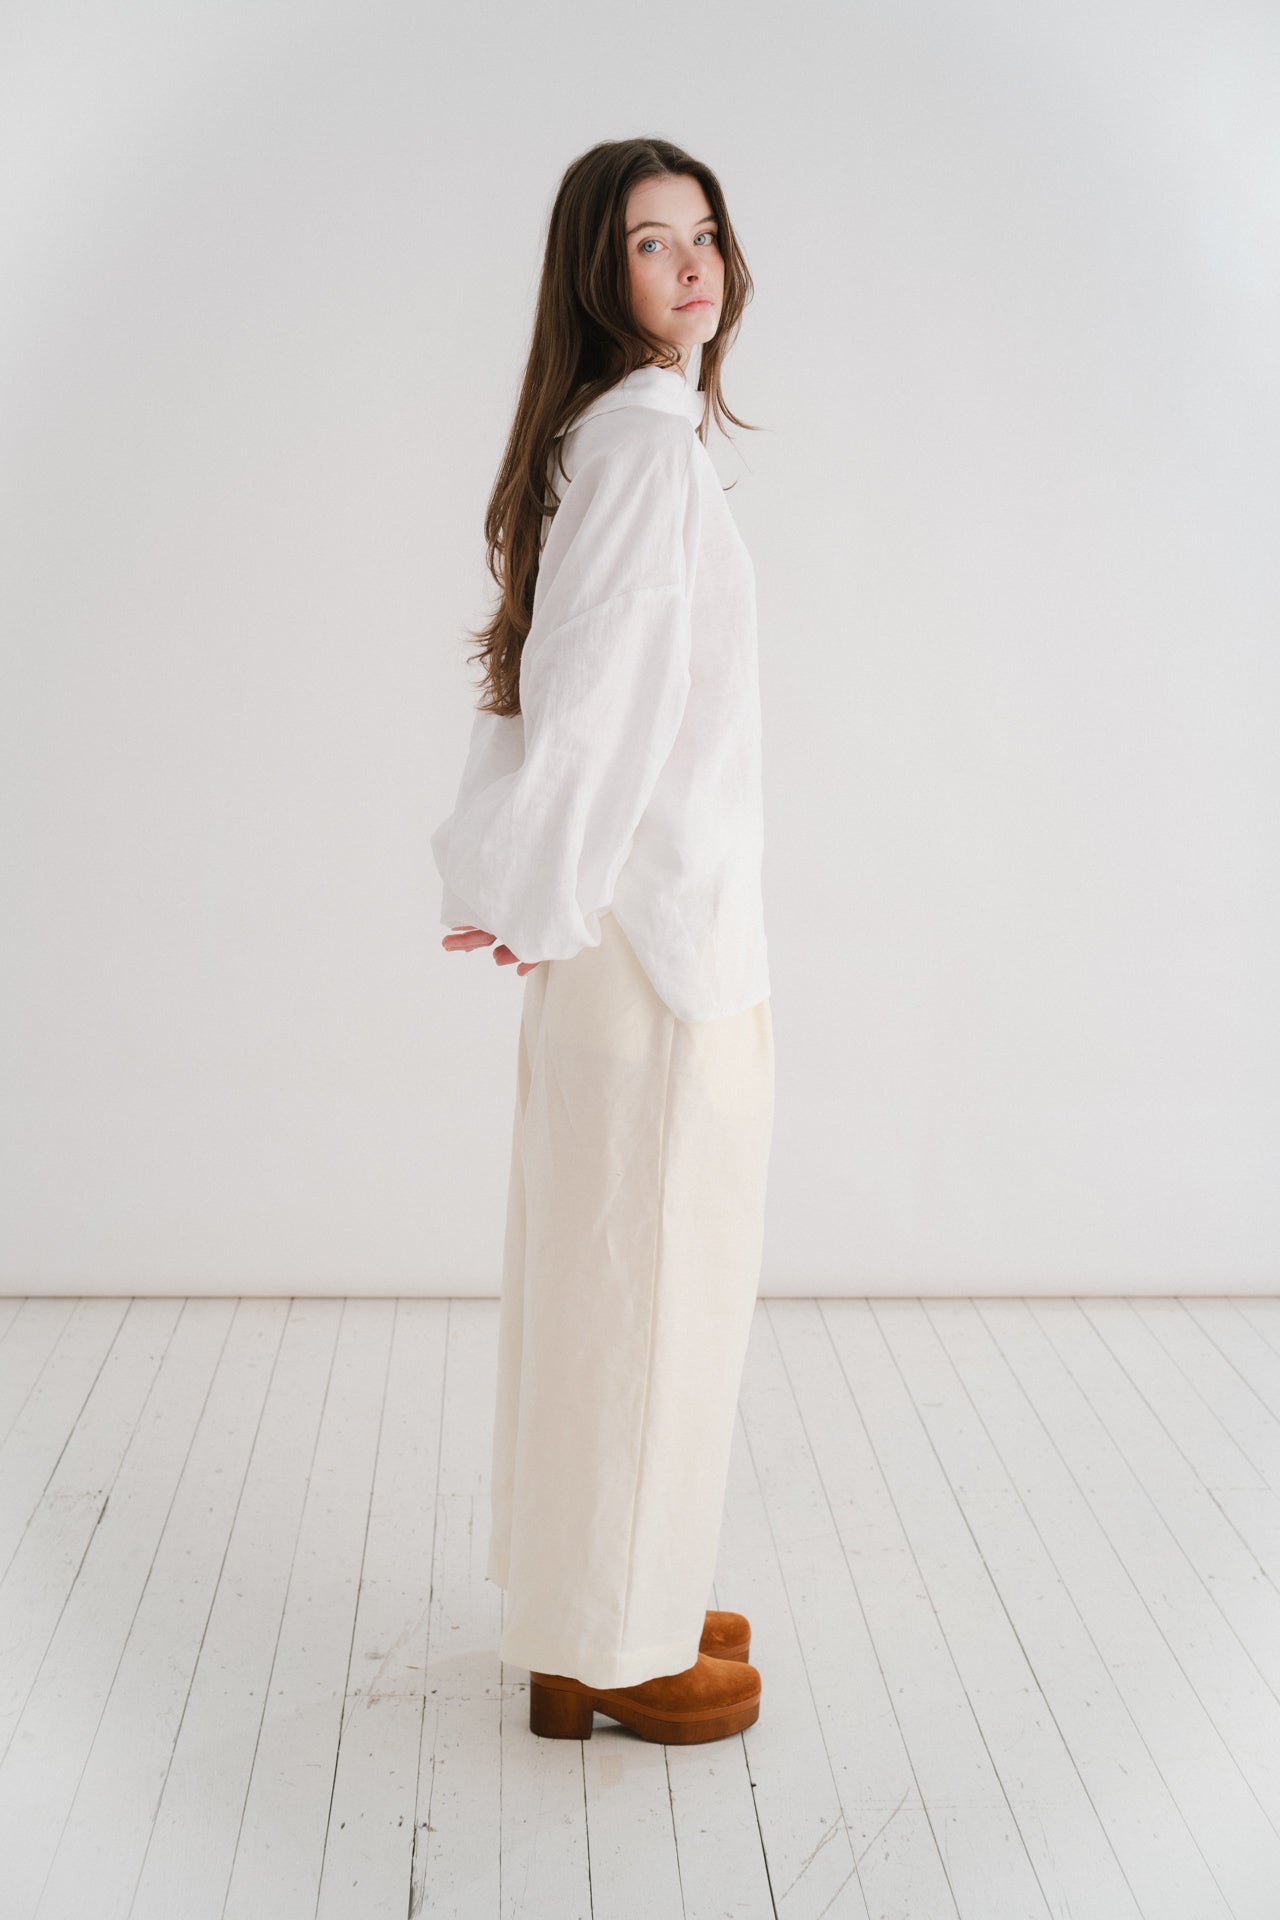 BOYFRIEND TROUSERS - TUSK | The Boyfriend Trouser - a new, more tailored piece for SS24. Cut with a dropped crotch and wide leg. Contrasted with a smart waistband and pleat detail, these are so wearable yet will make you feel really put together. They pai